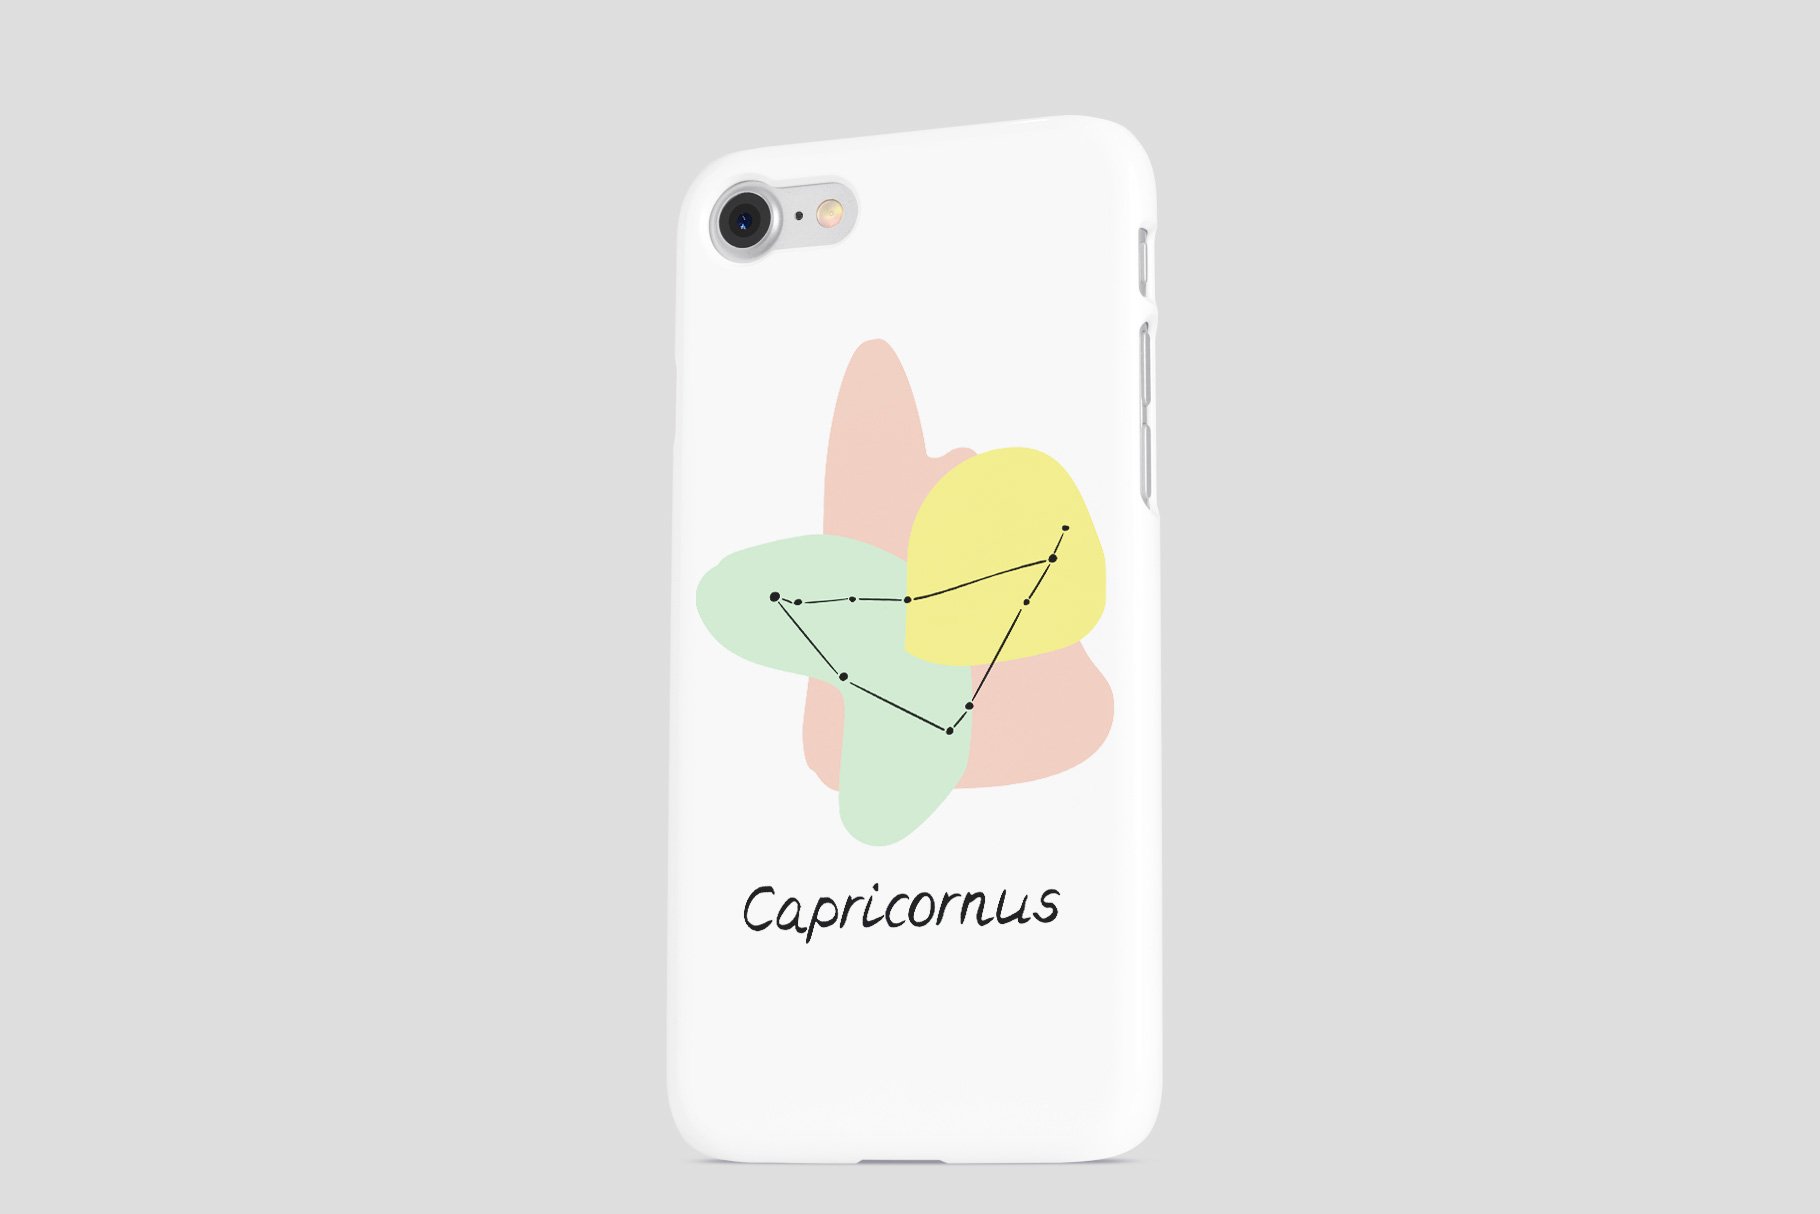 Phone Case Made On The Abstrac Zodiac Signs Vector Illustration.